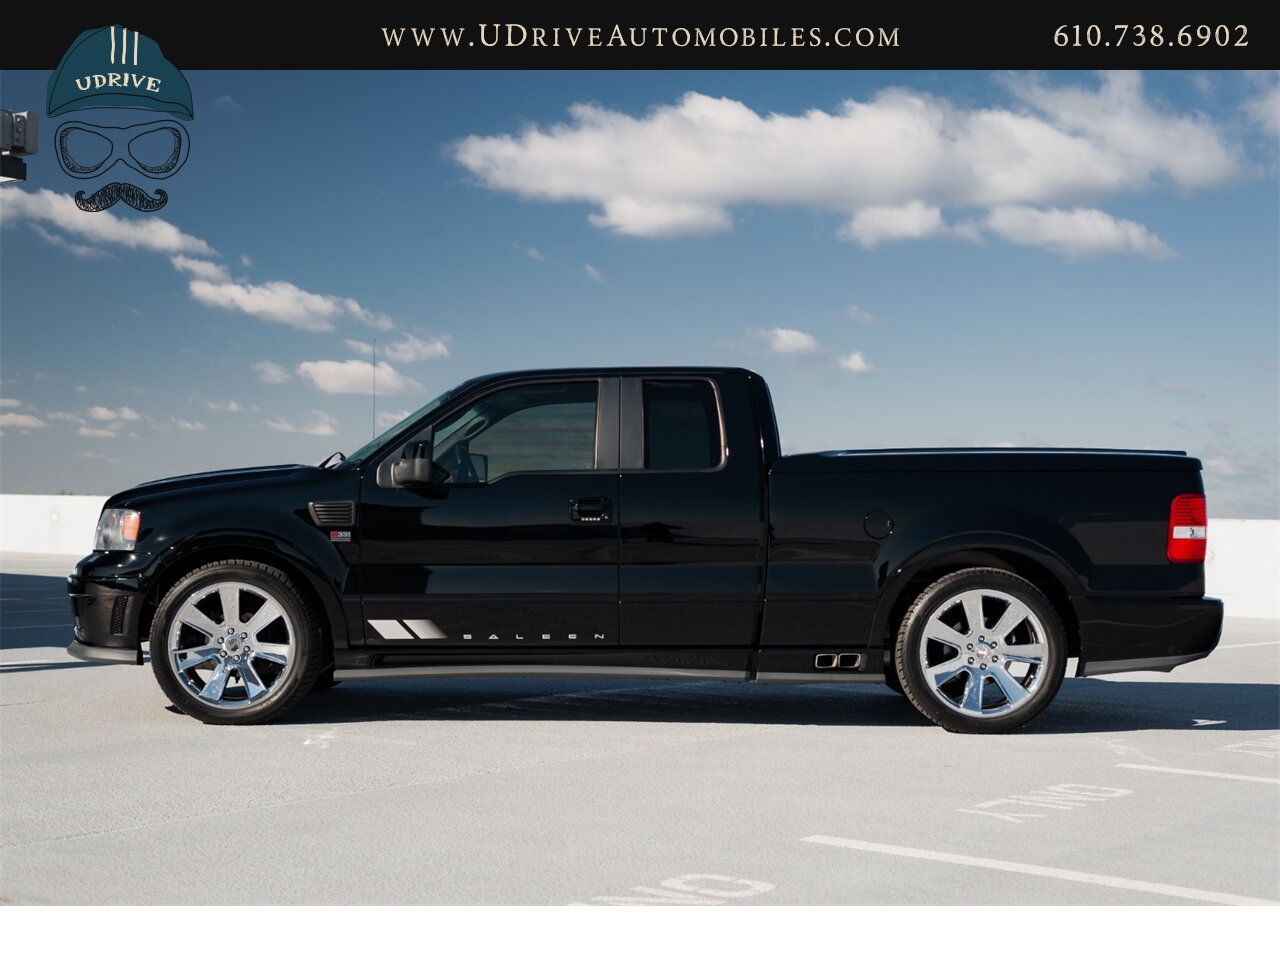 2007 Ford F-150 Saleen S331 Supercharged #60 13k Miles 450HP   - Photo 8 - West Chester, PA 19382